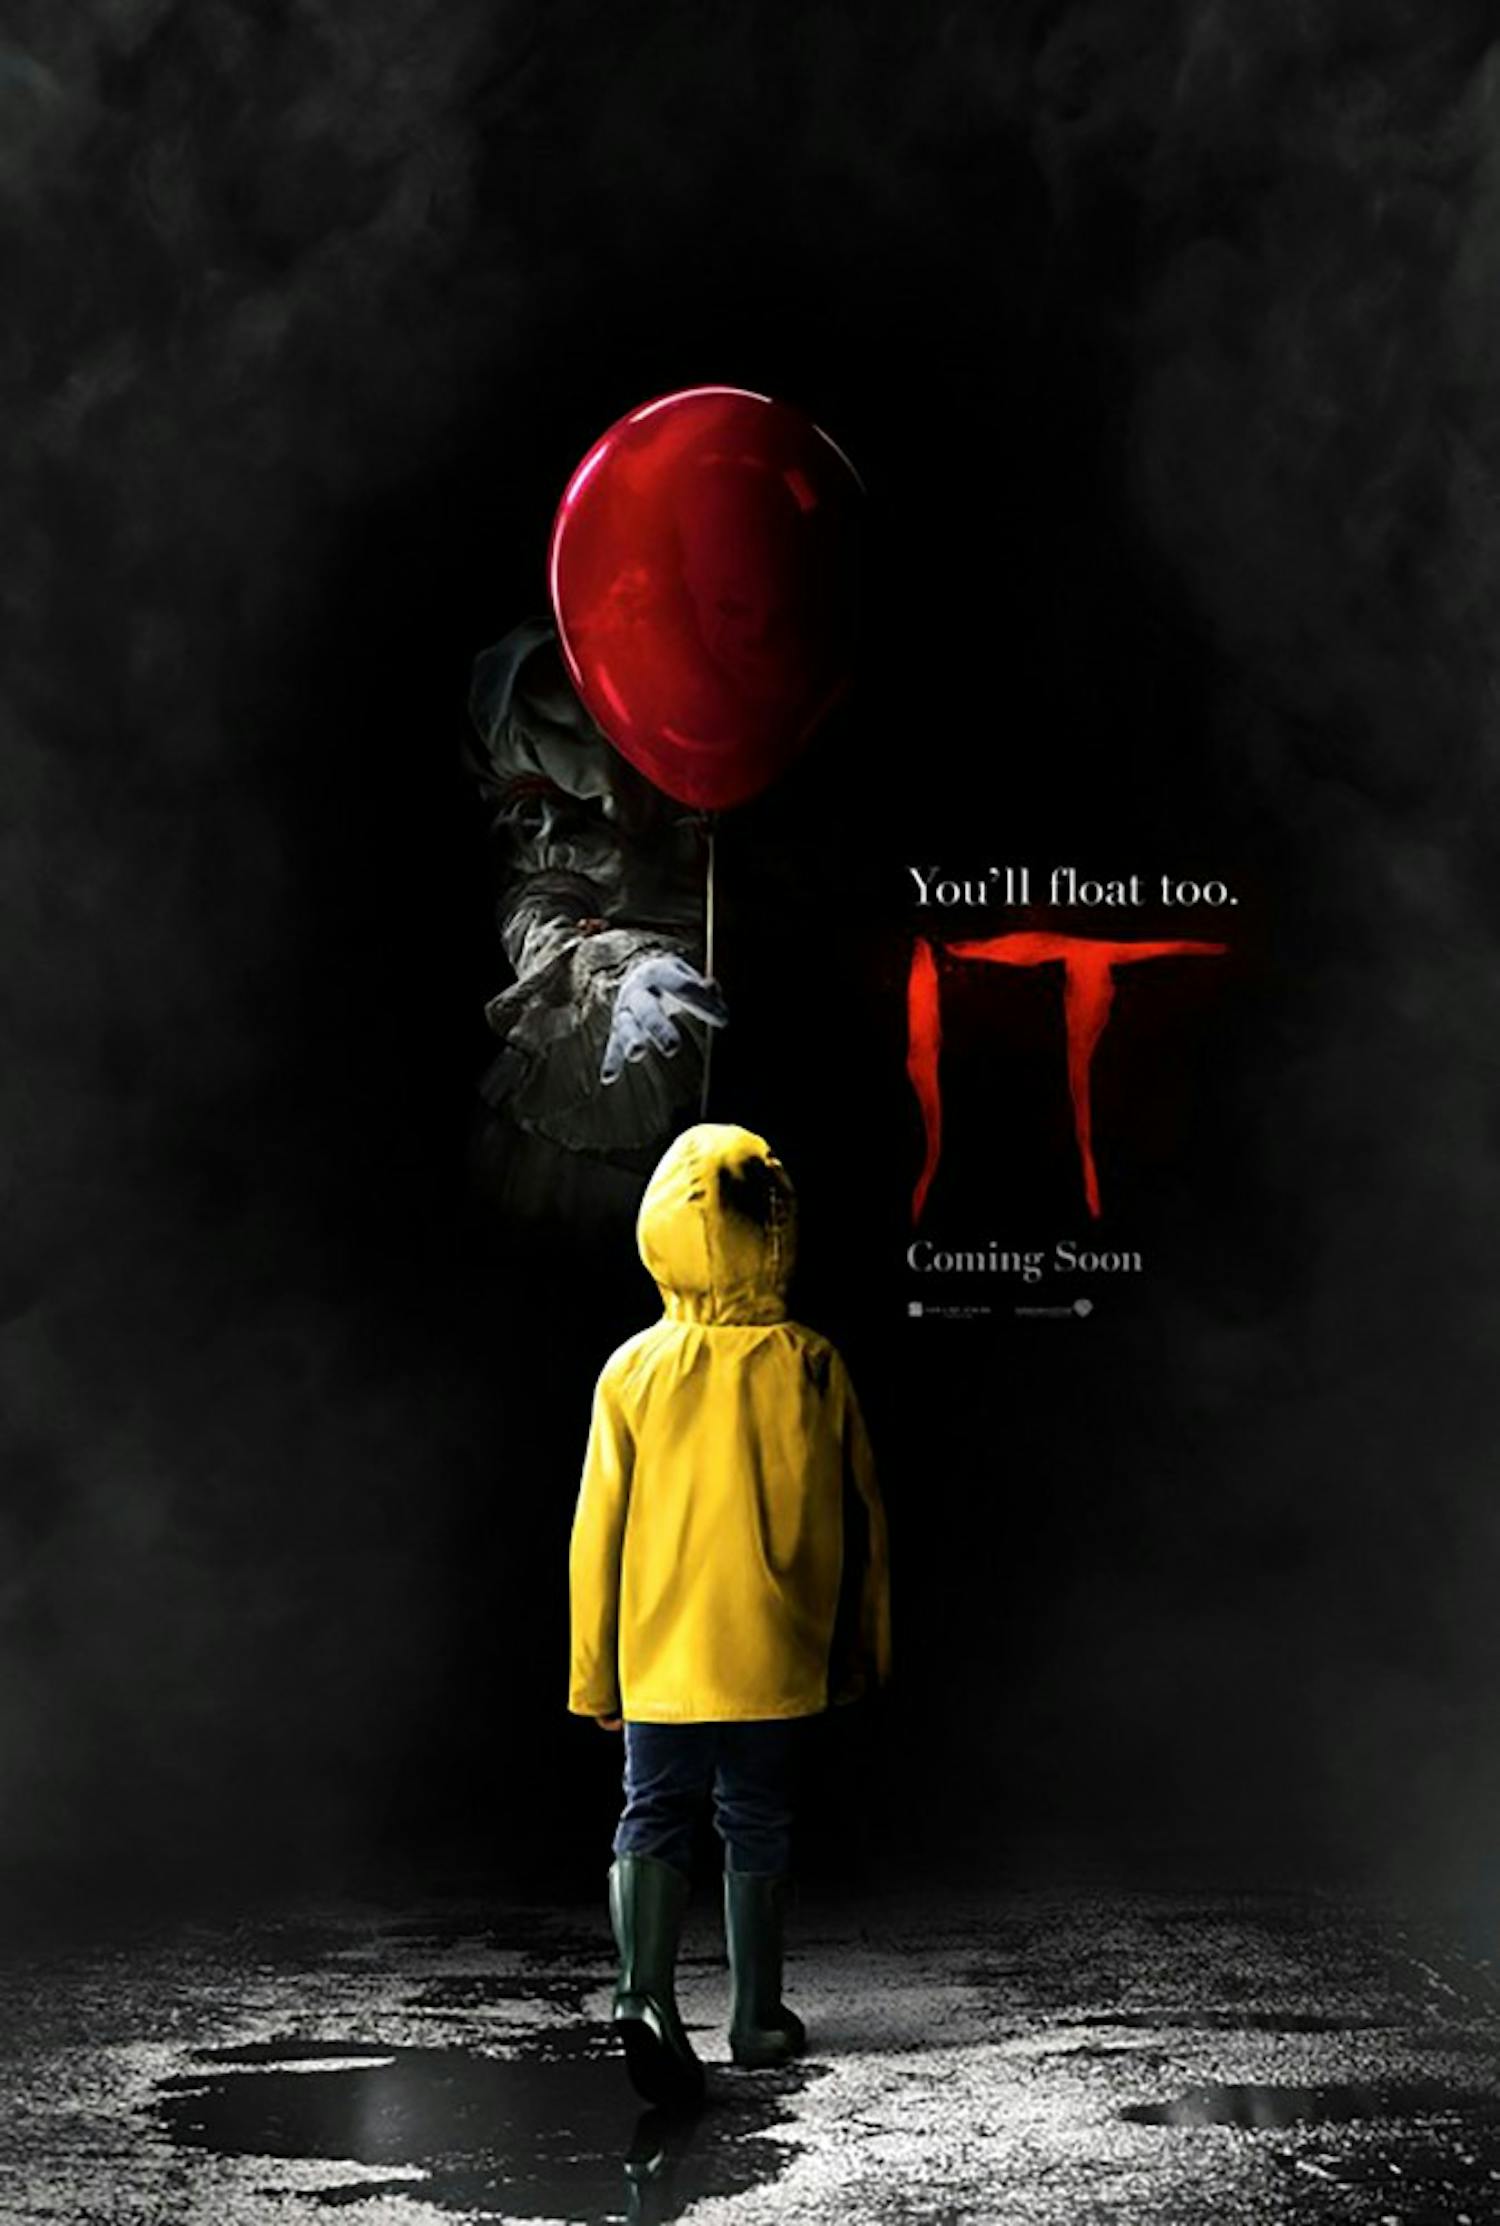 The Halloween scares come early this year as horror movies fill cinemas. “It” is an adaptation of the Stephen King novel of the same name, telling the story of a group of kids battling a shapeshifting clown in a small town in Maine.&nbsp;